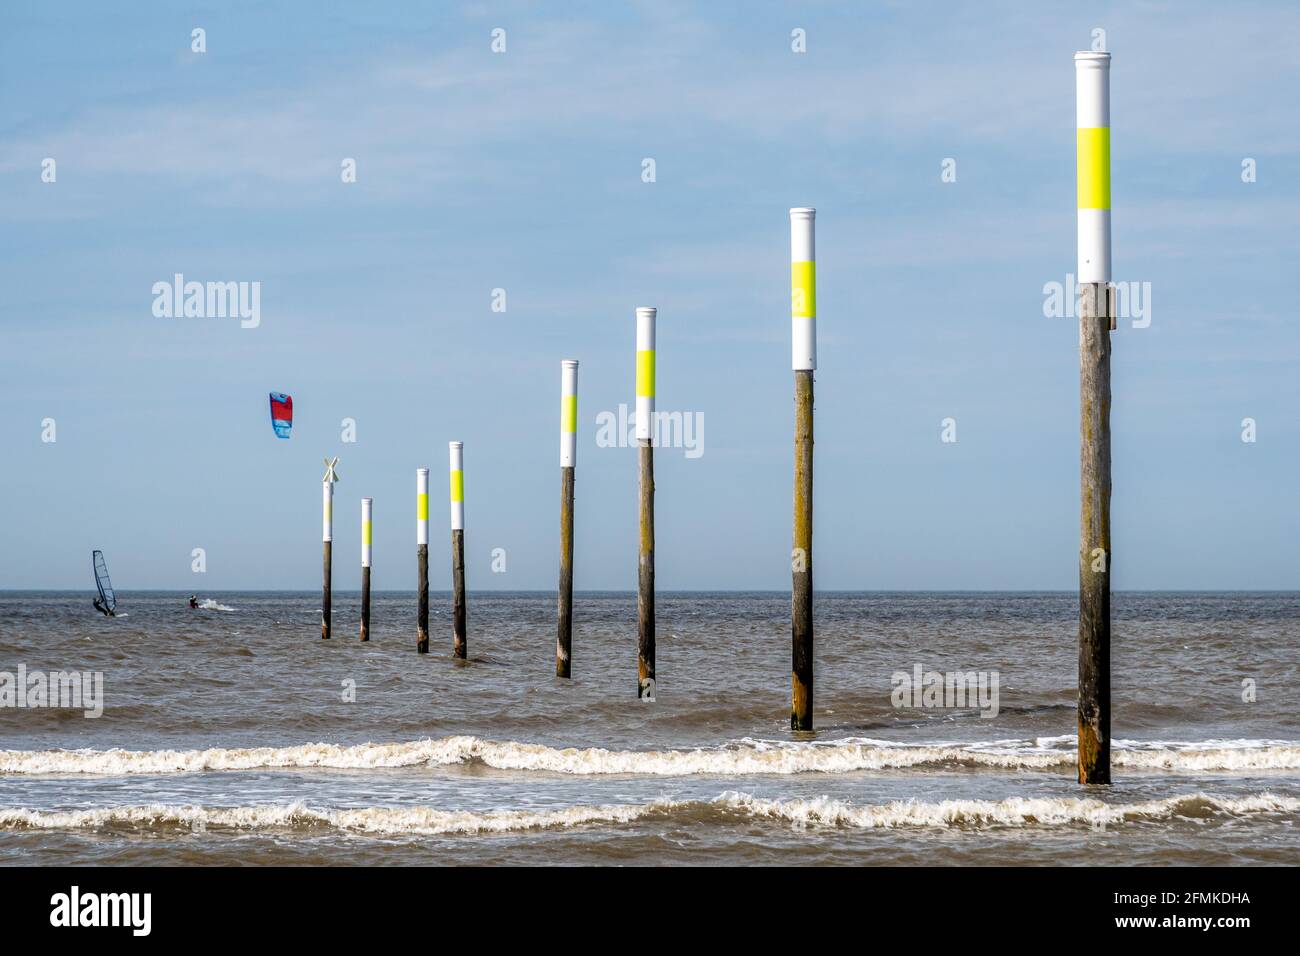 Kiters and surfers off the coast of Peter-Ording Stock Photo